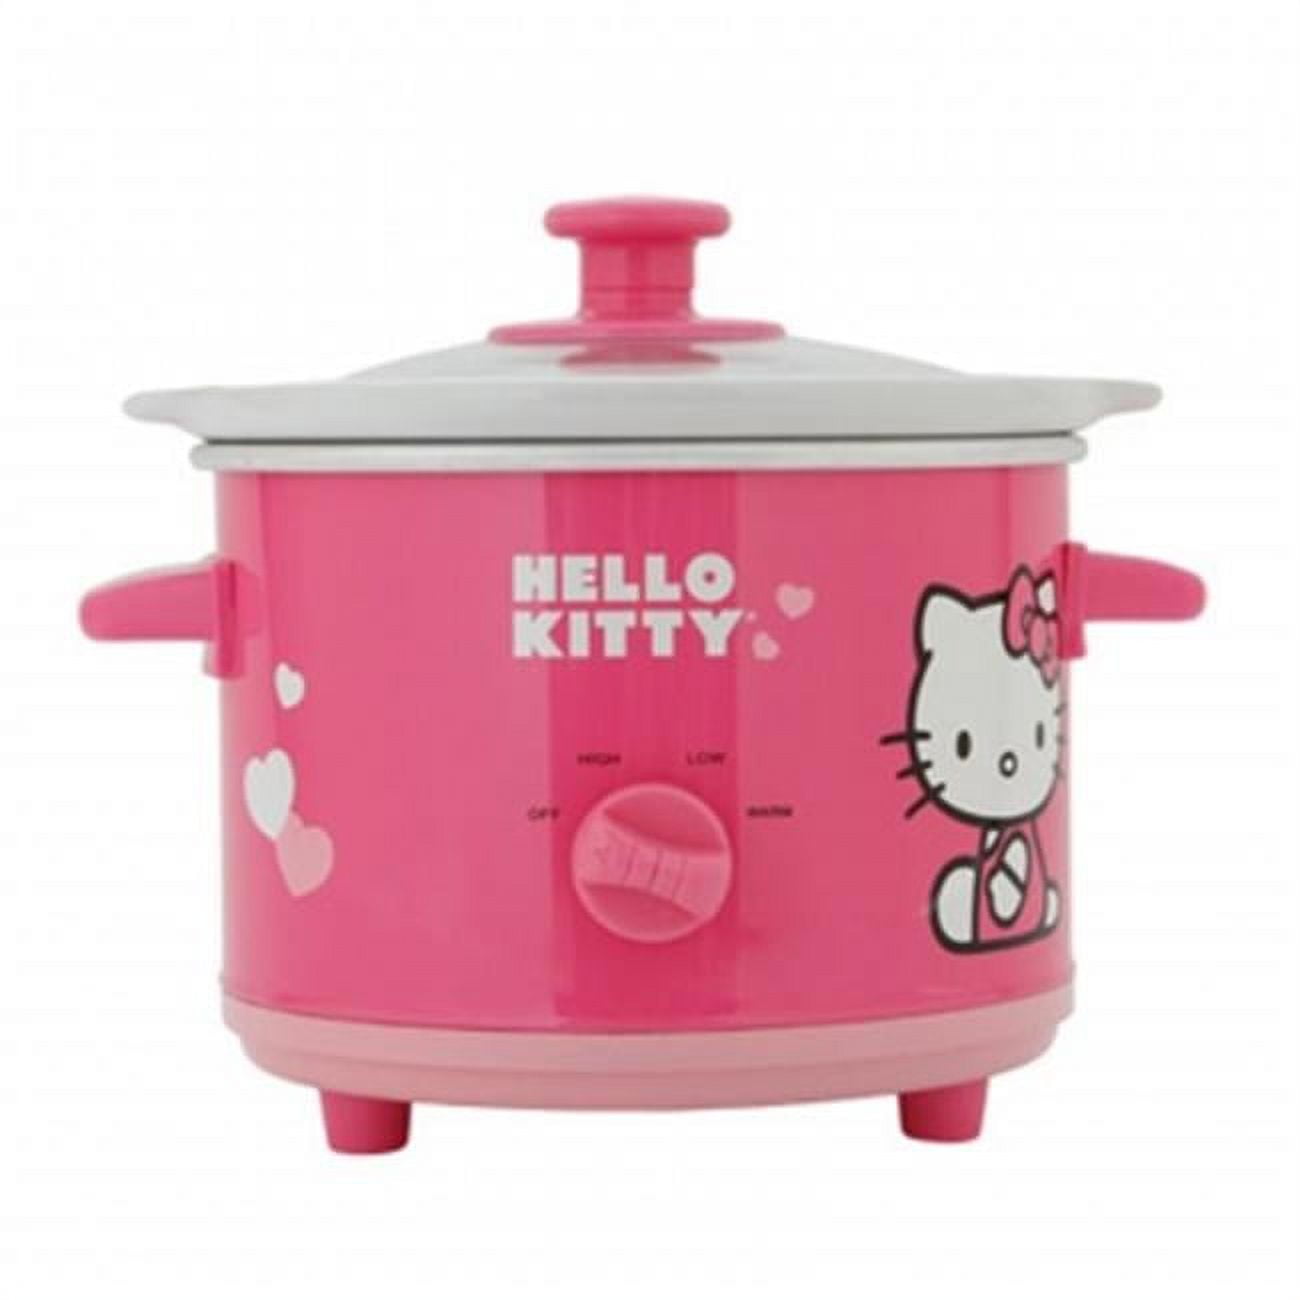 Hello Kitty Pink Slow Cookers